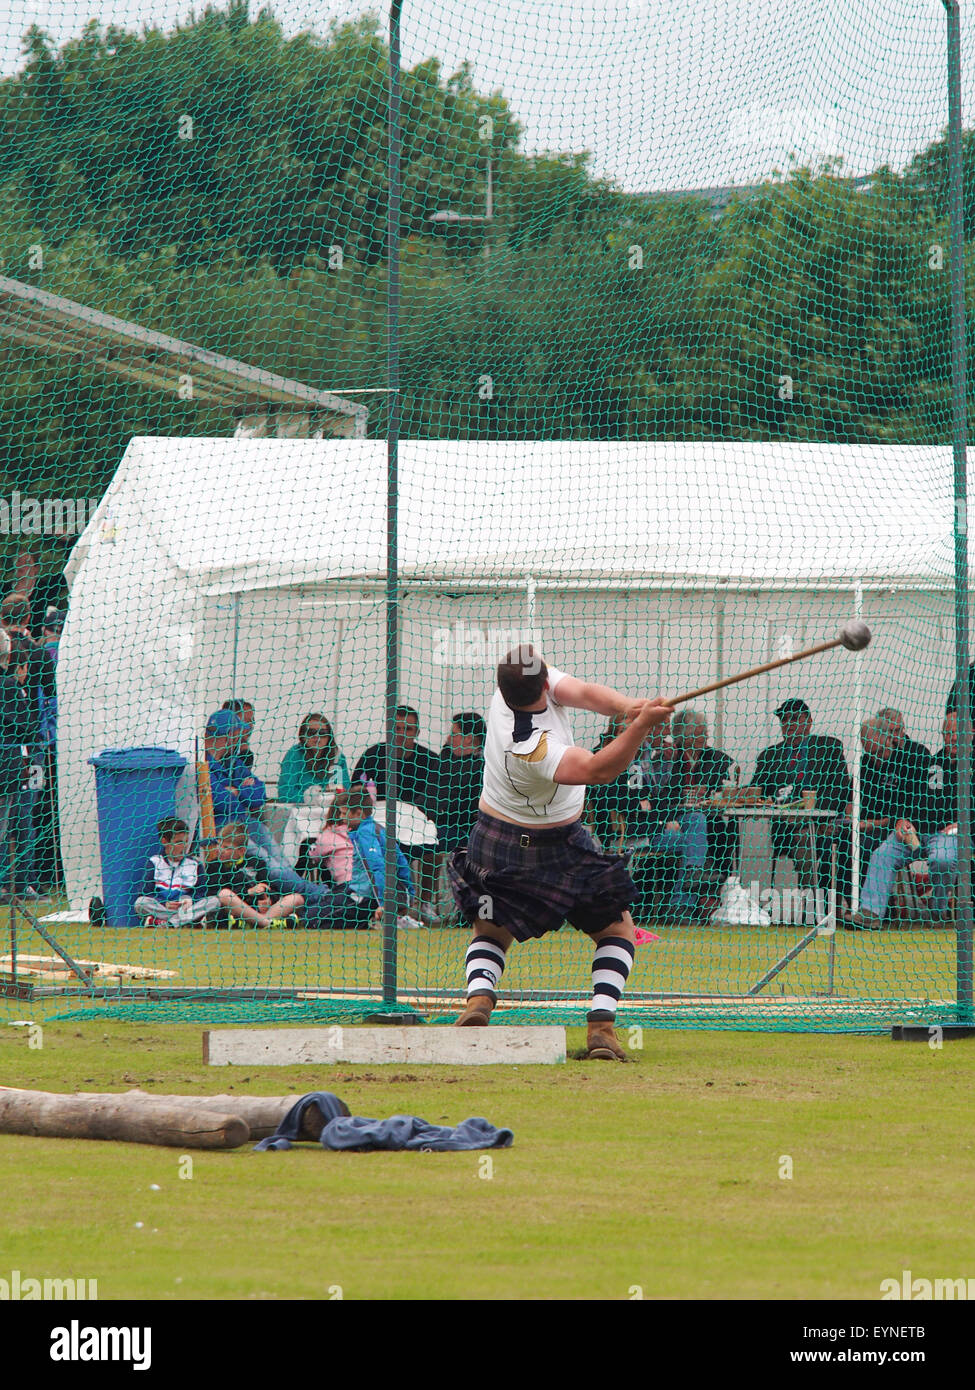 St. Andrews, Scotland - July 26th 2015: A competitor performing in the Hammer Throw competition at the Highland Games. Stock Photo